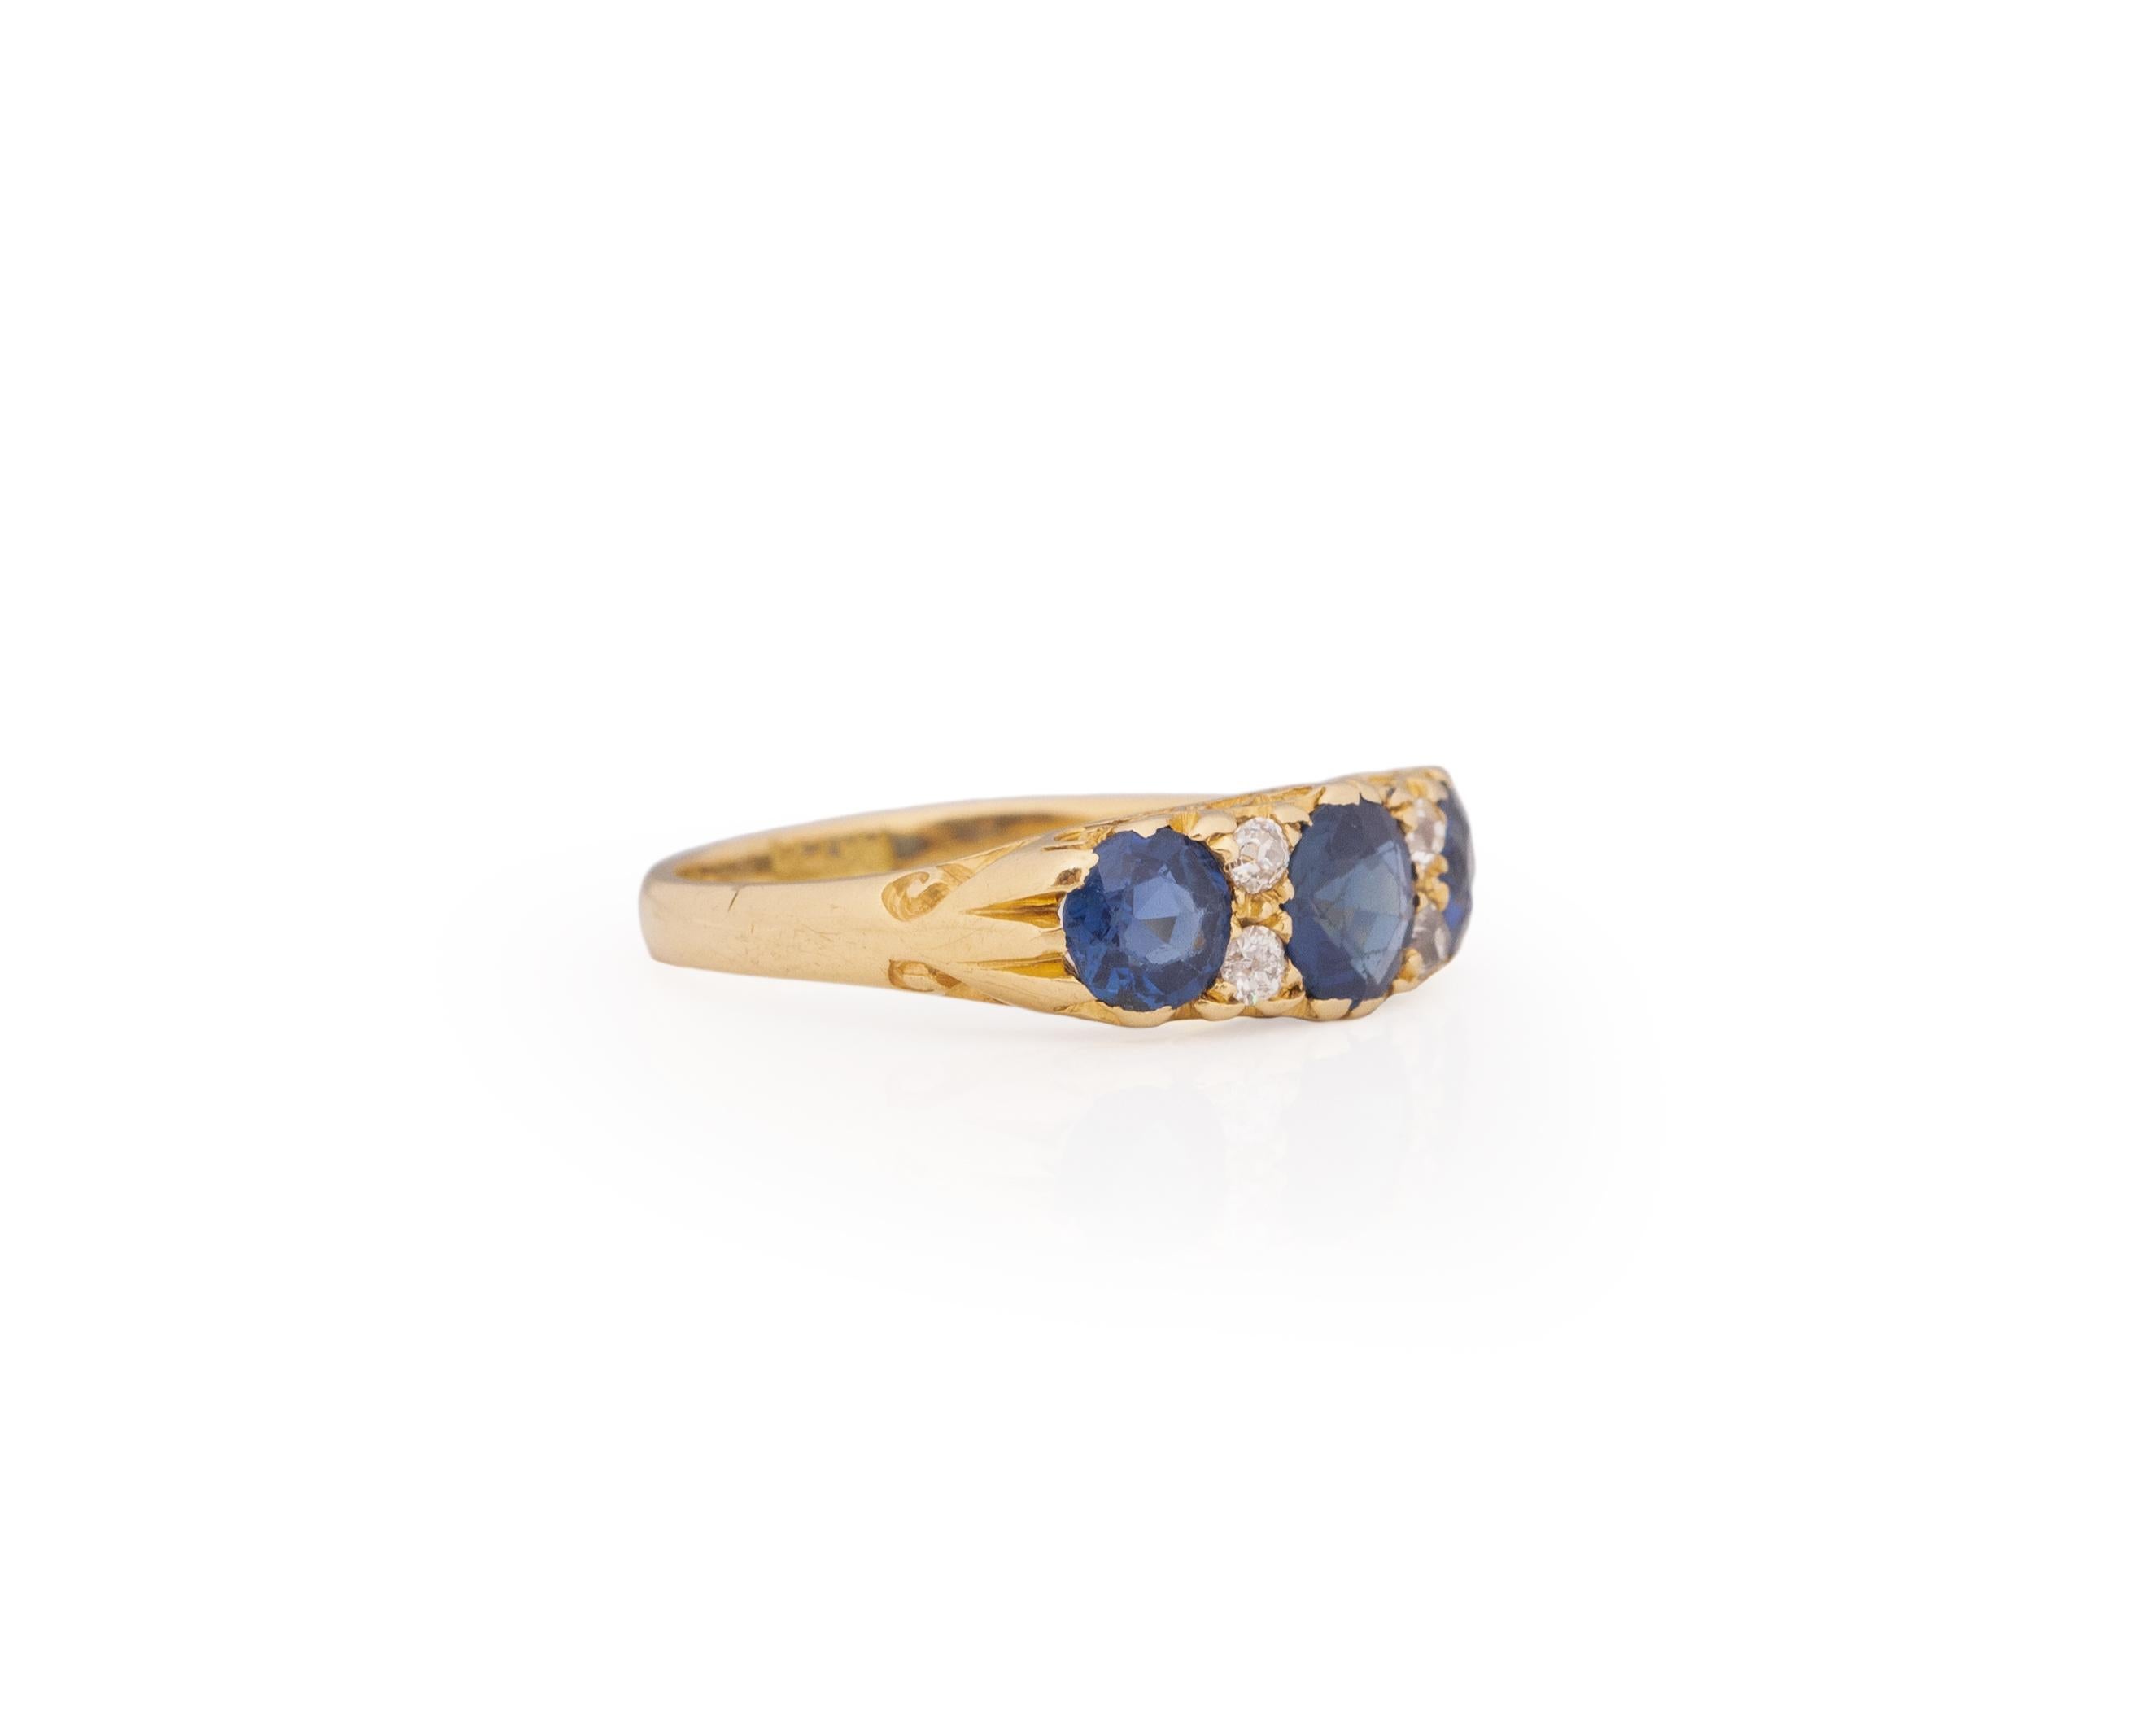 Ring Size: 6.25
Metal Type: 18K Yellow Gold [Hallmarked, and Tested]
Weight: 3.3 grams

Sapphire Details:
GIA REPORT #: 6223460905
Weight: 1.75ct, total weight (3 Sapphires)
Cut: Antique Cushion
Color: Blue

Diamond Details: Natural, Old Mine